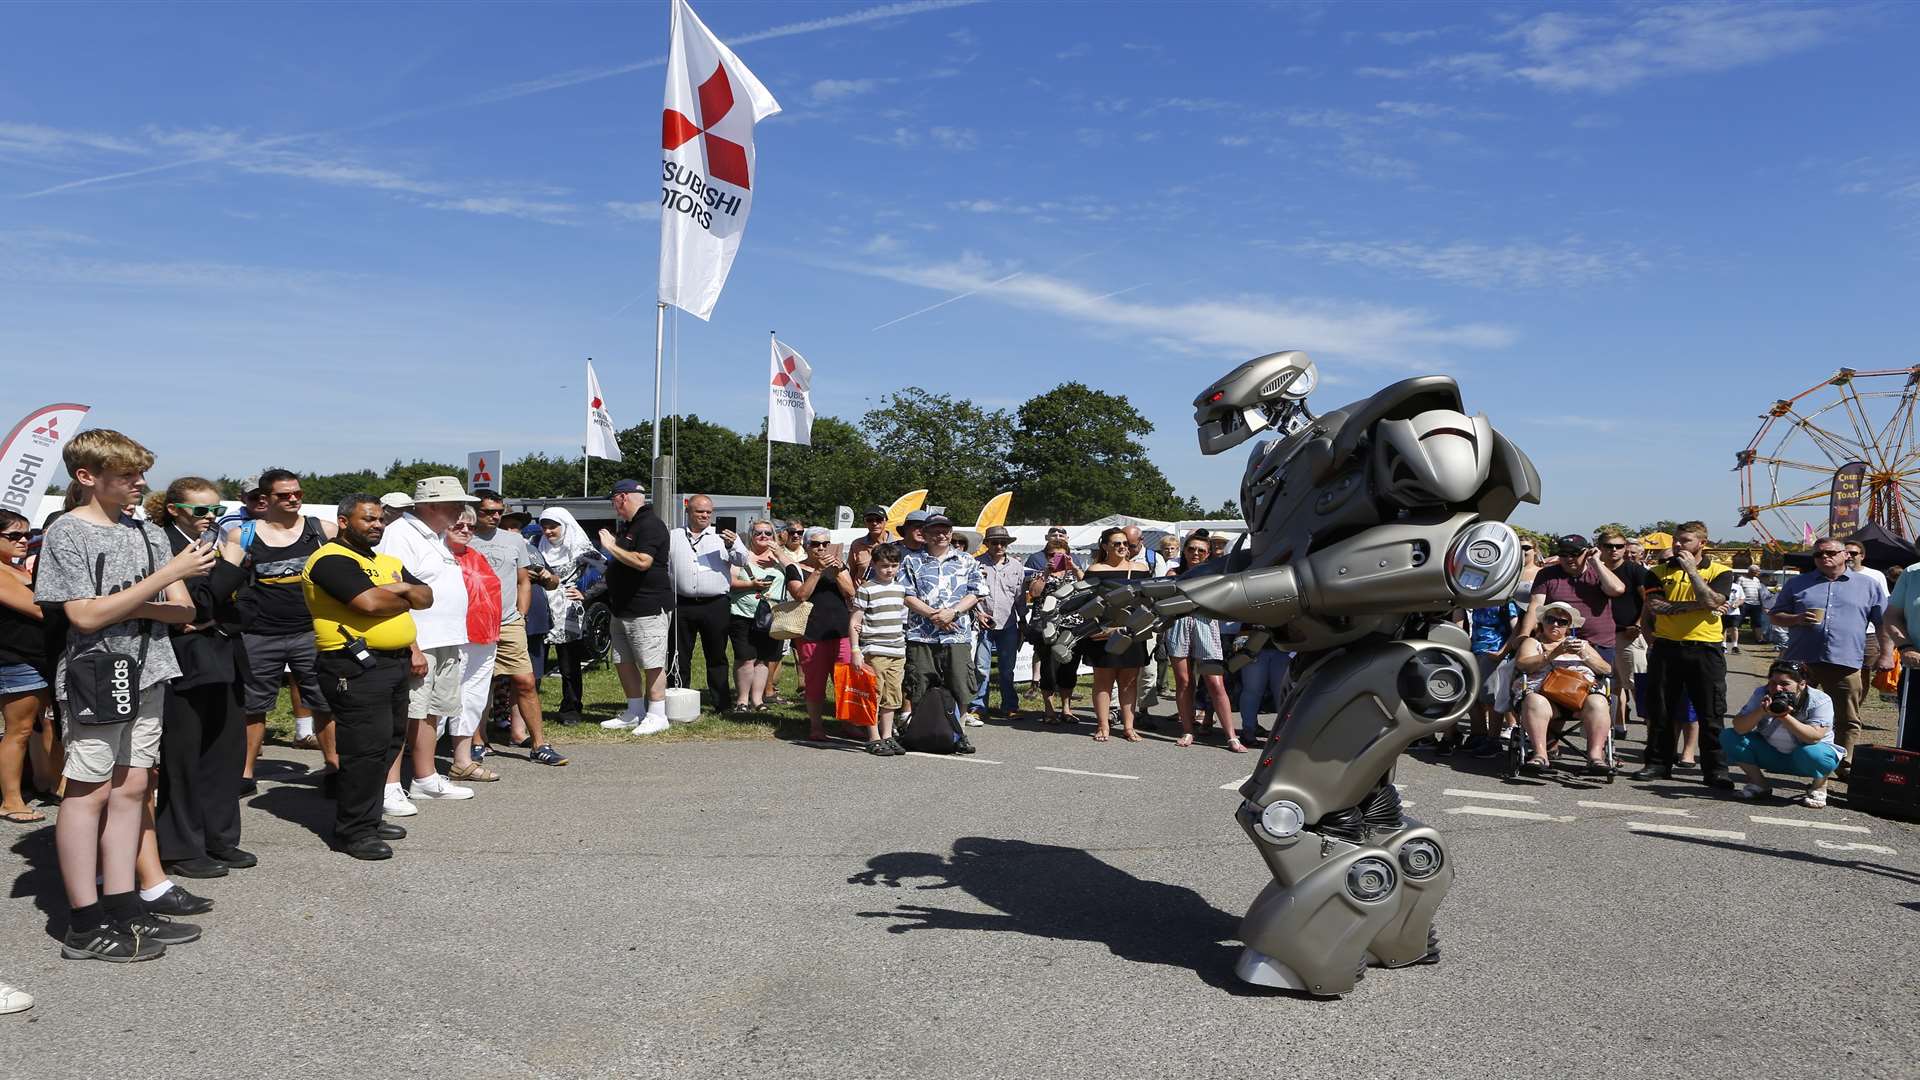 Titan the Robot entertains the crowds at the County Show